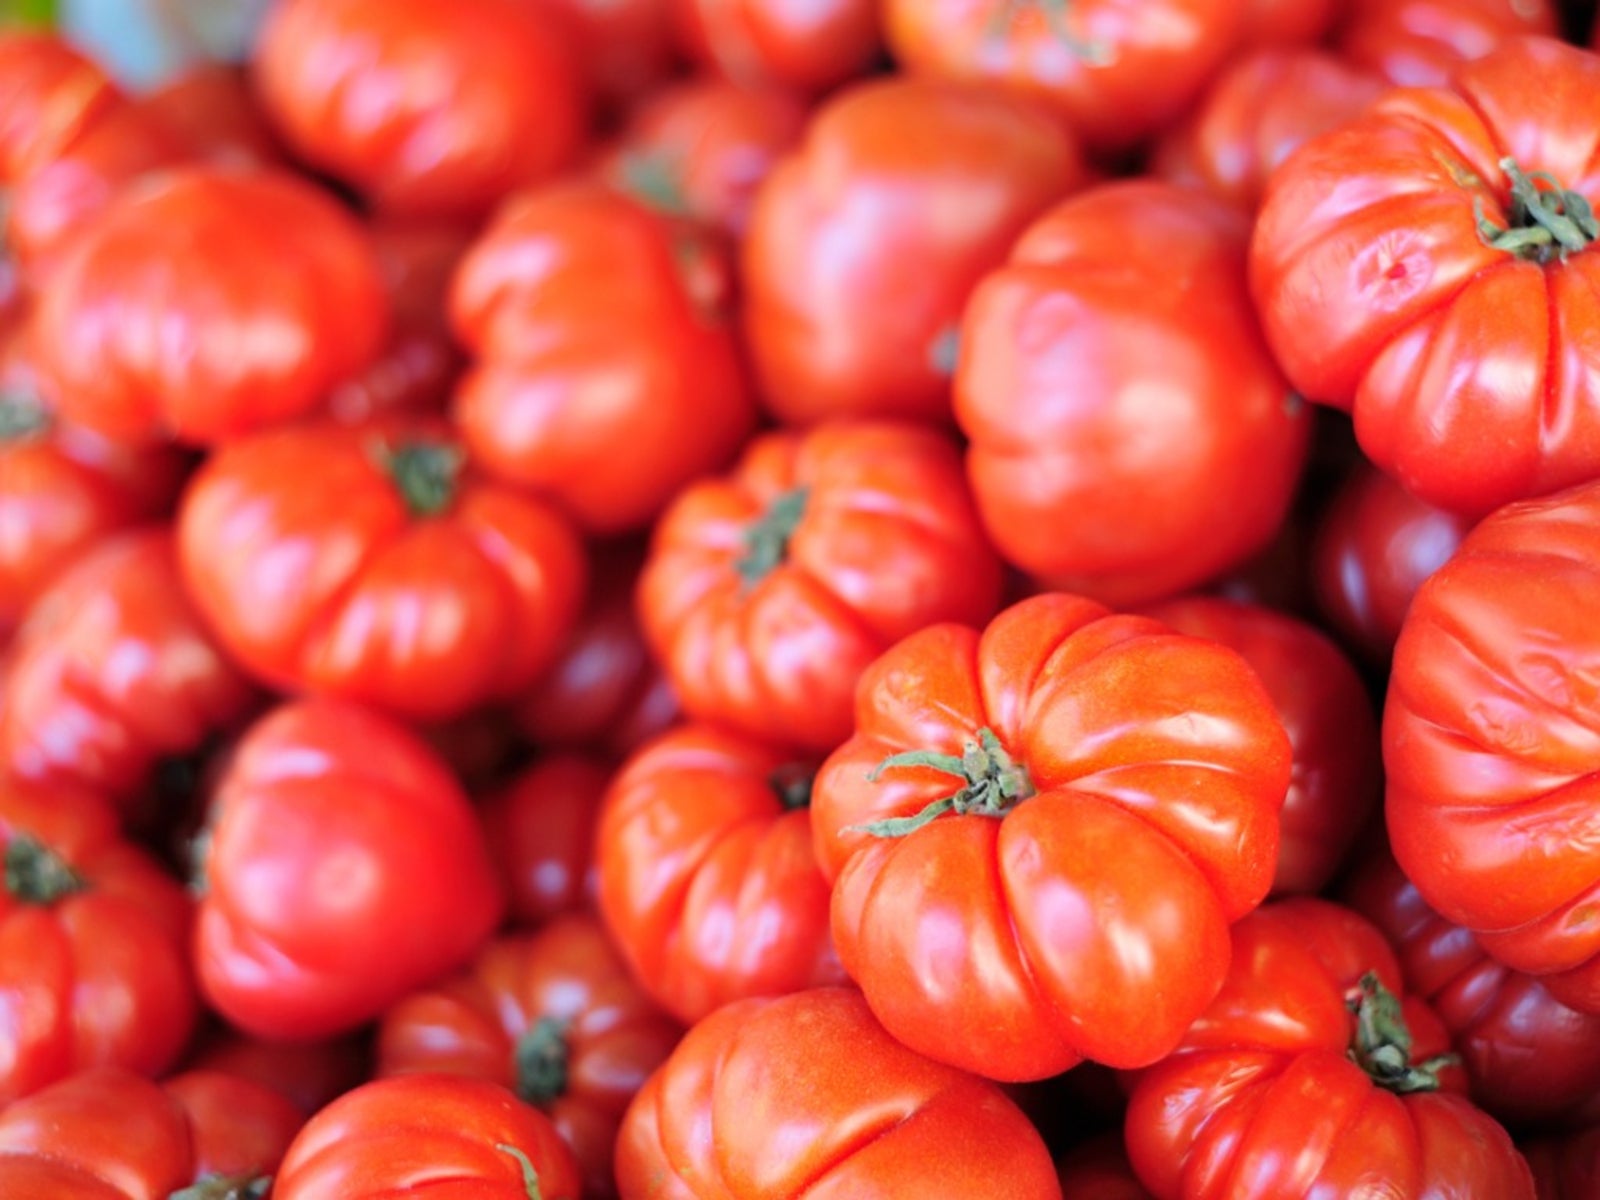 Grow Delicious Large Red Beefsteak Tomatoes with NAR Heirloom Variety